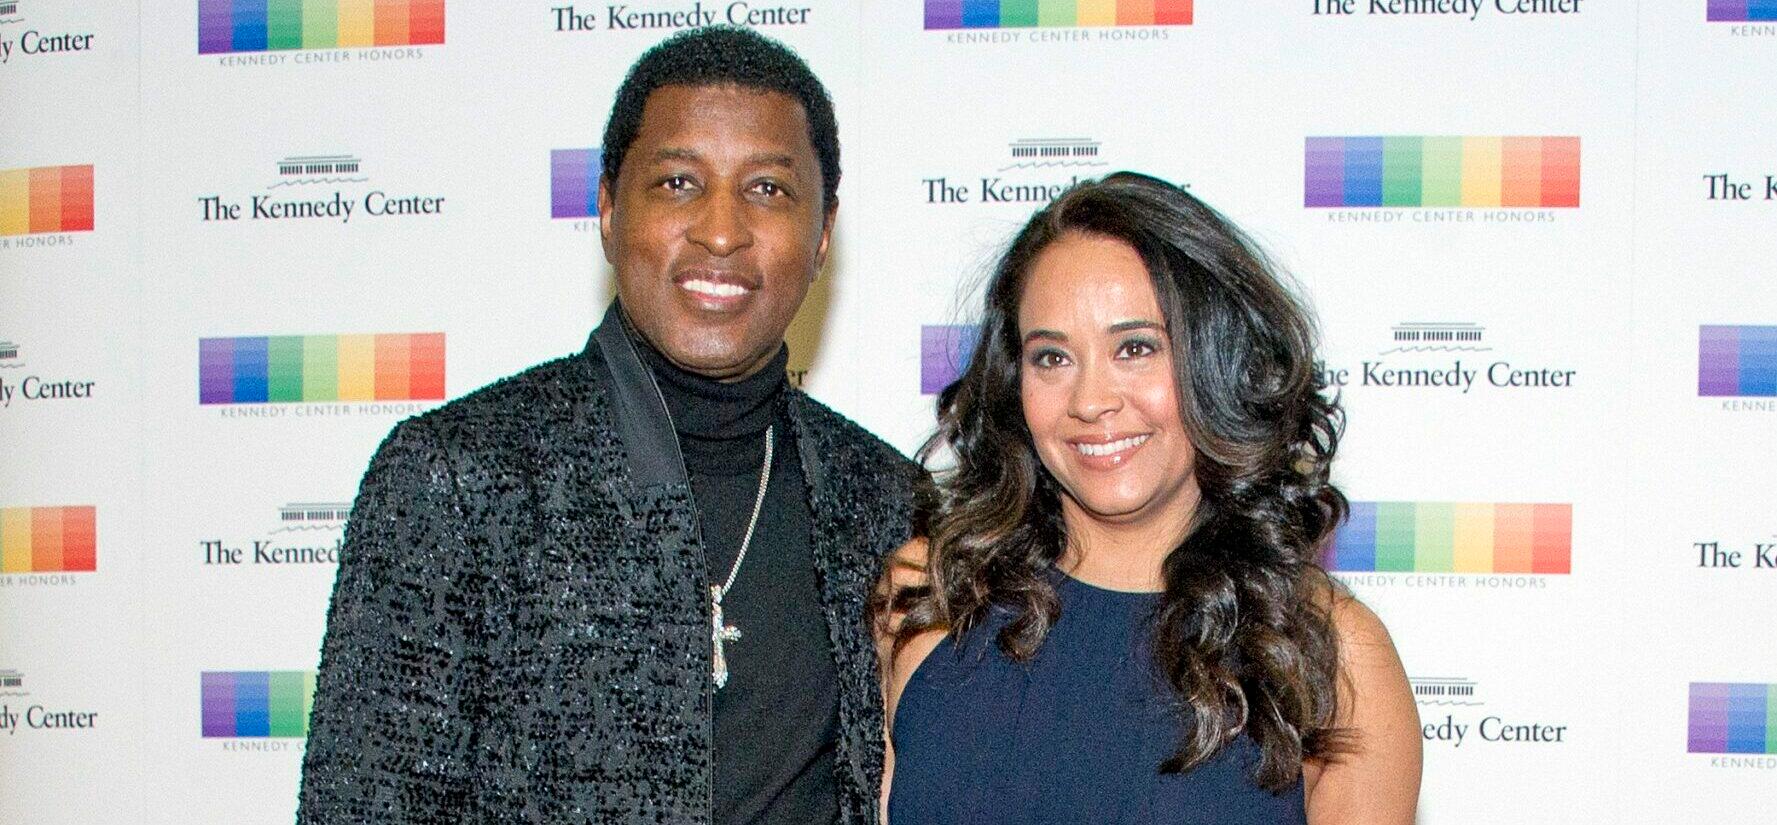 Babyface To Pay Ex-Wife $37,500 Per Month In Divorce Settlement